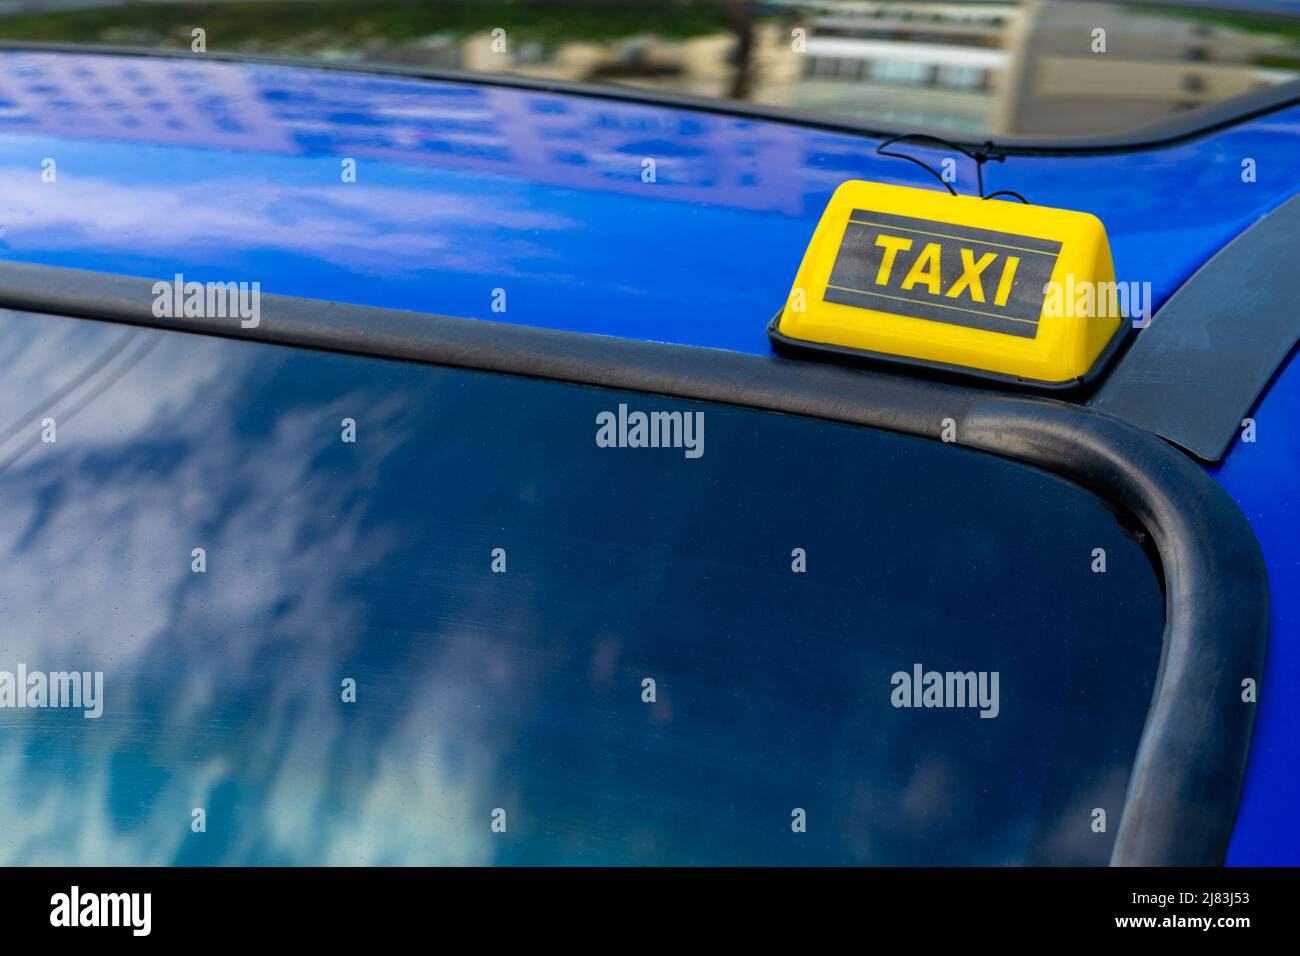 yellow chip Taxi on the roof of a blue car. Stock Photo